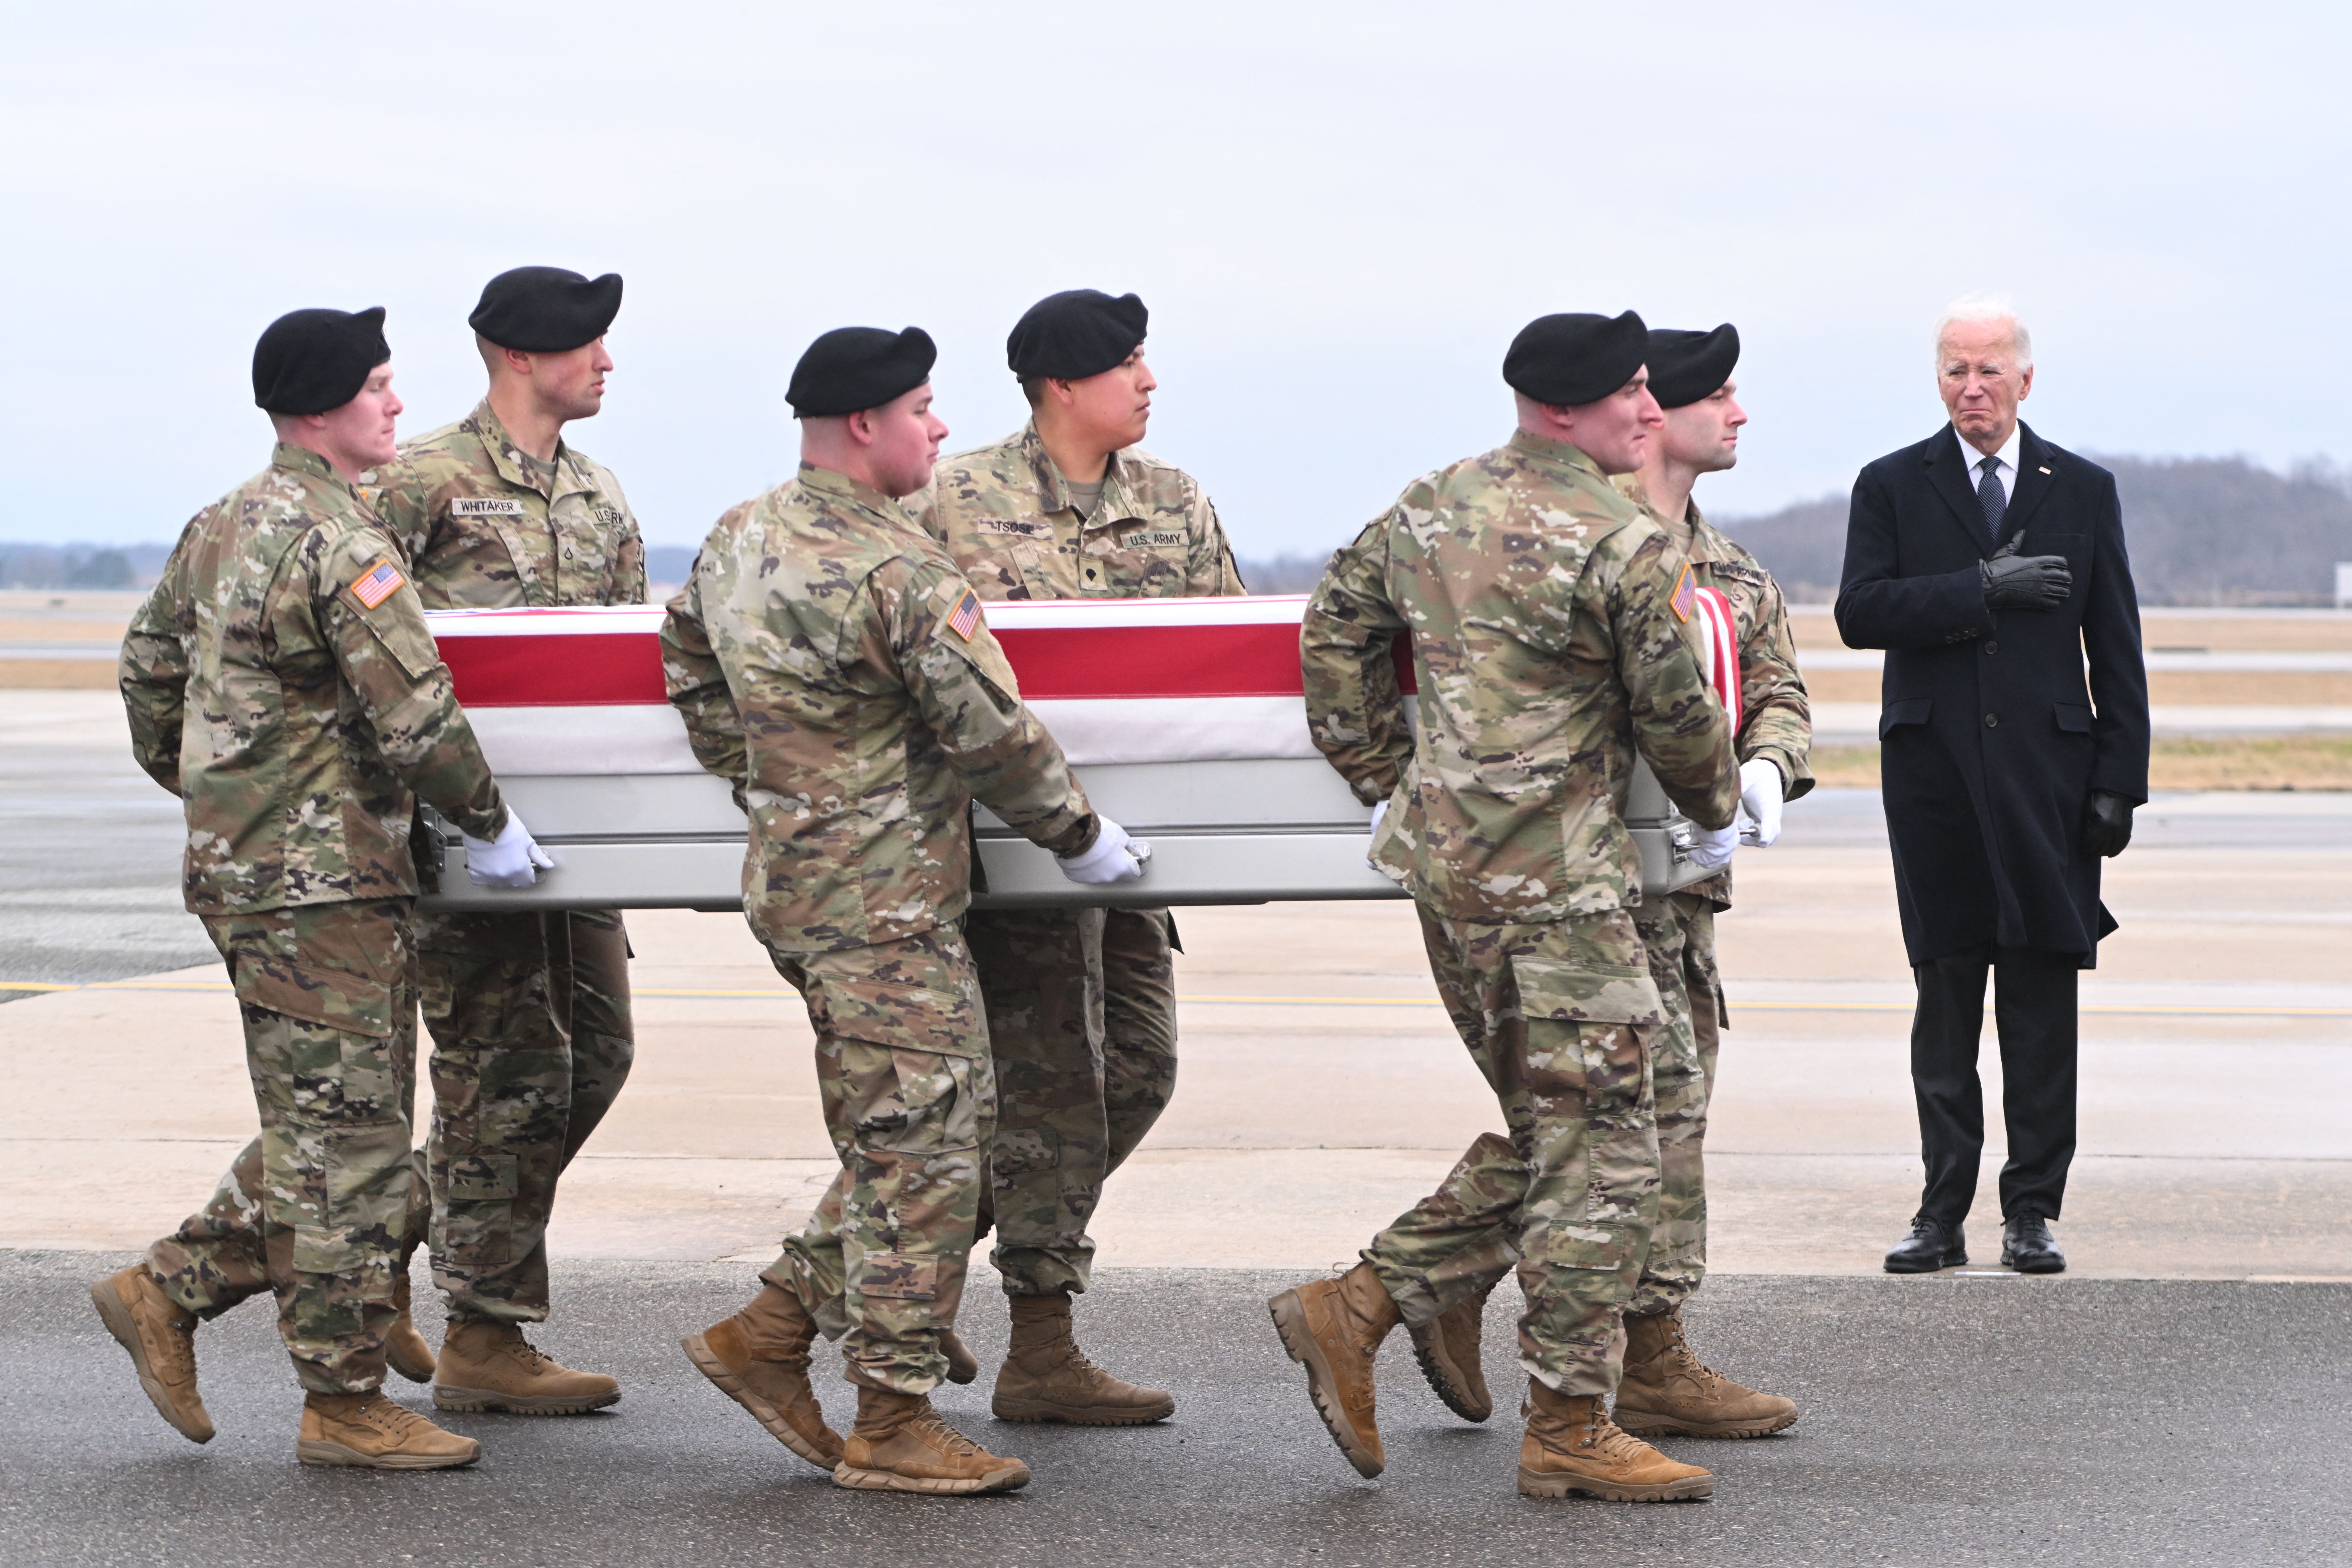 Soldiers carry casket